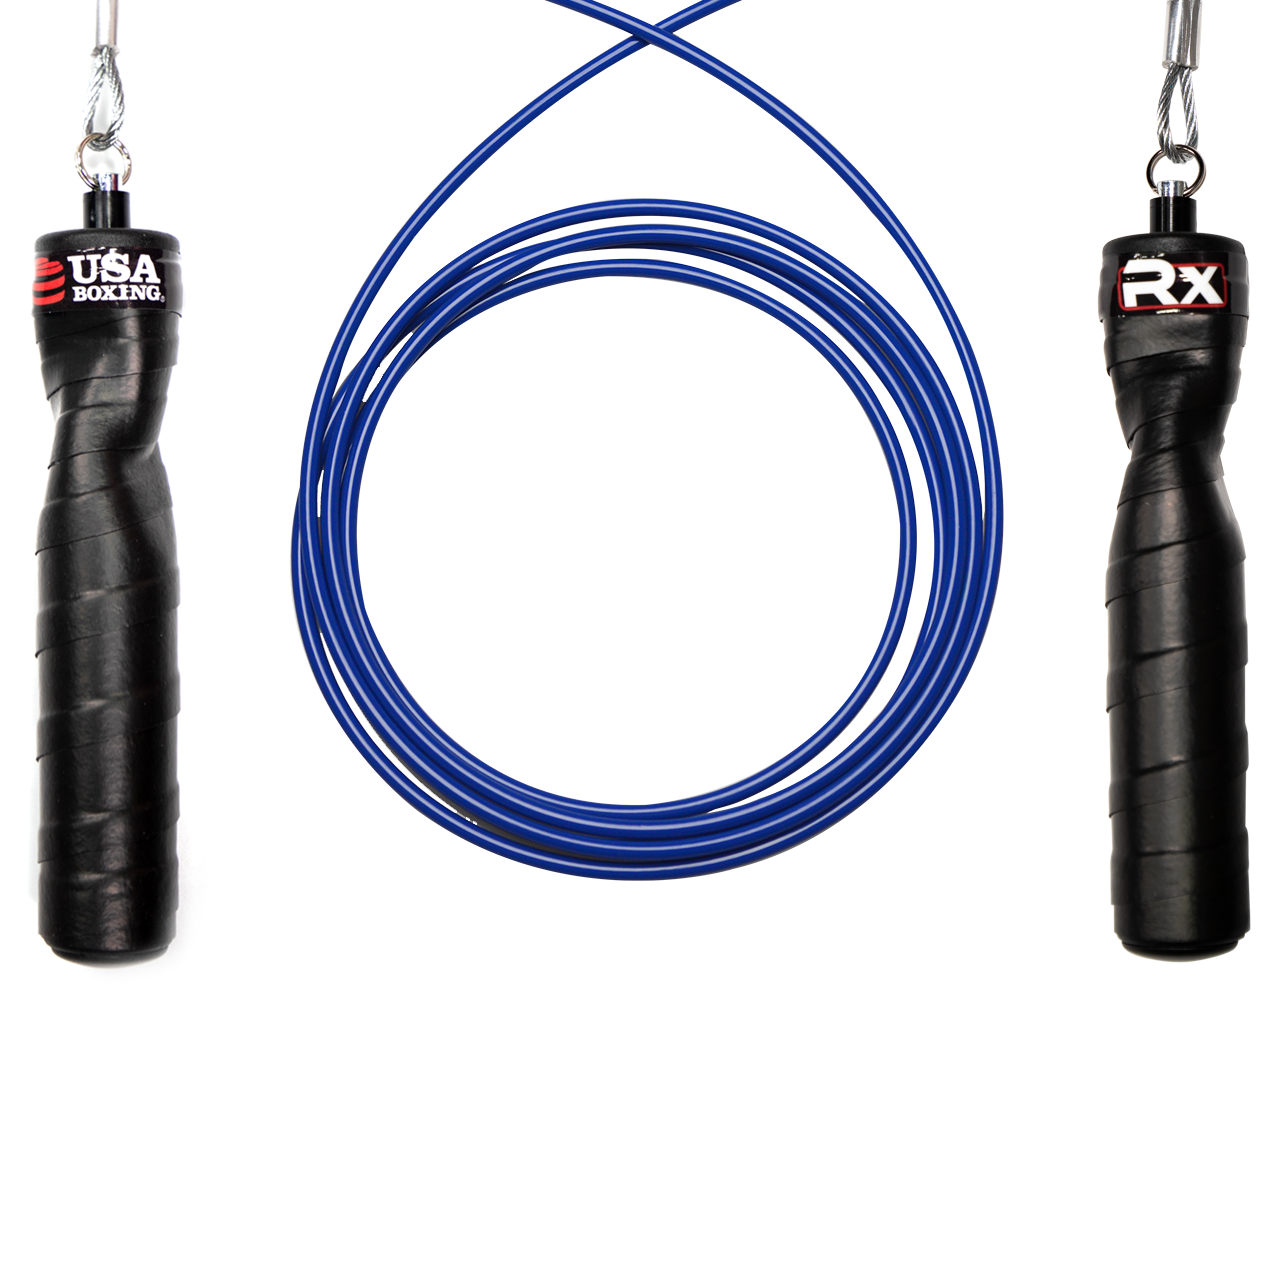 The Official Jump Rope Of USA Boxing